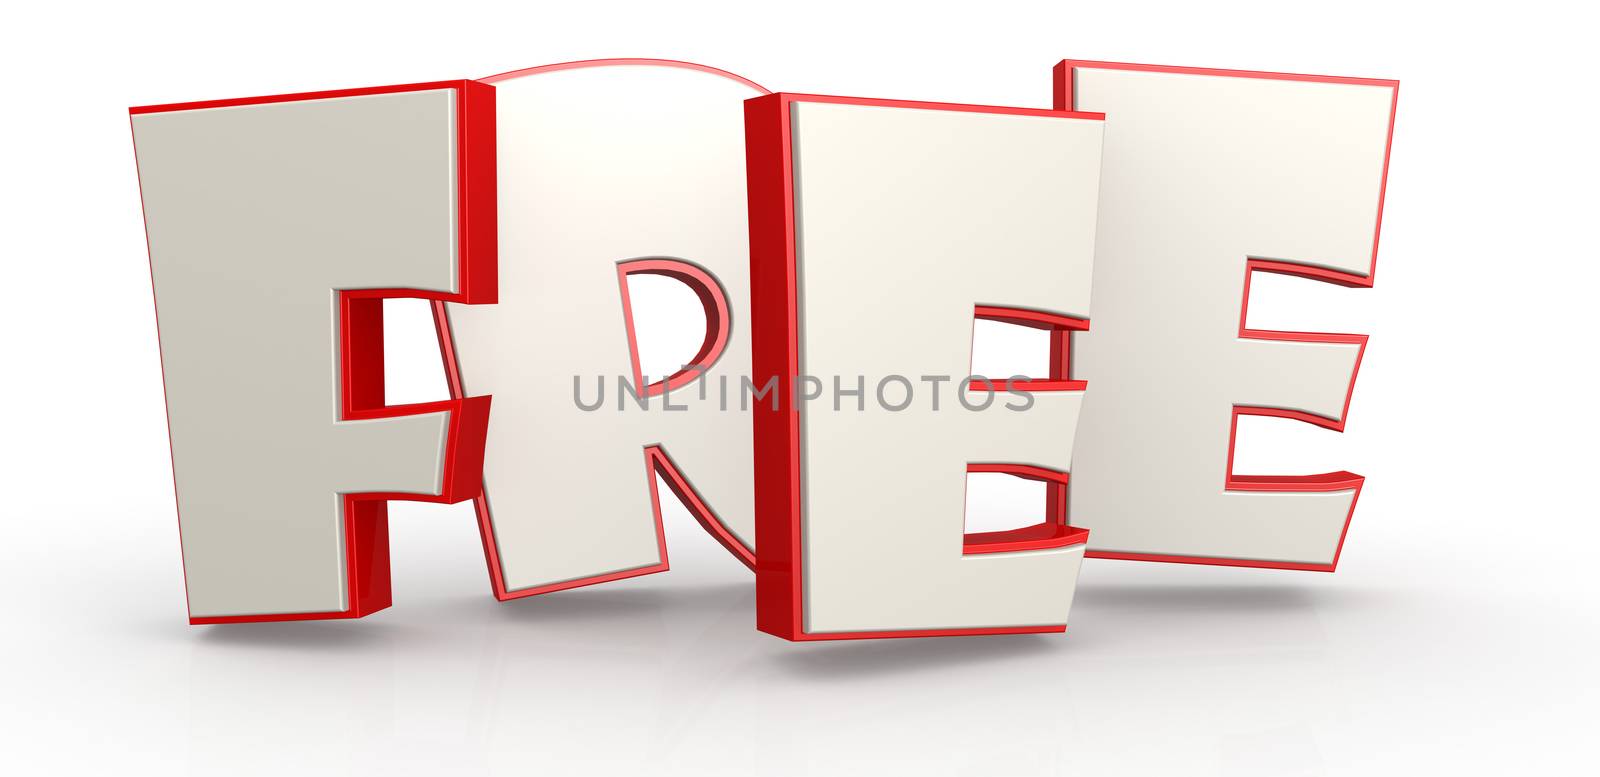 Free word with white background image with hi-res rendered artwork that could be used for any graphic design.